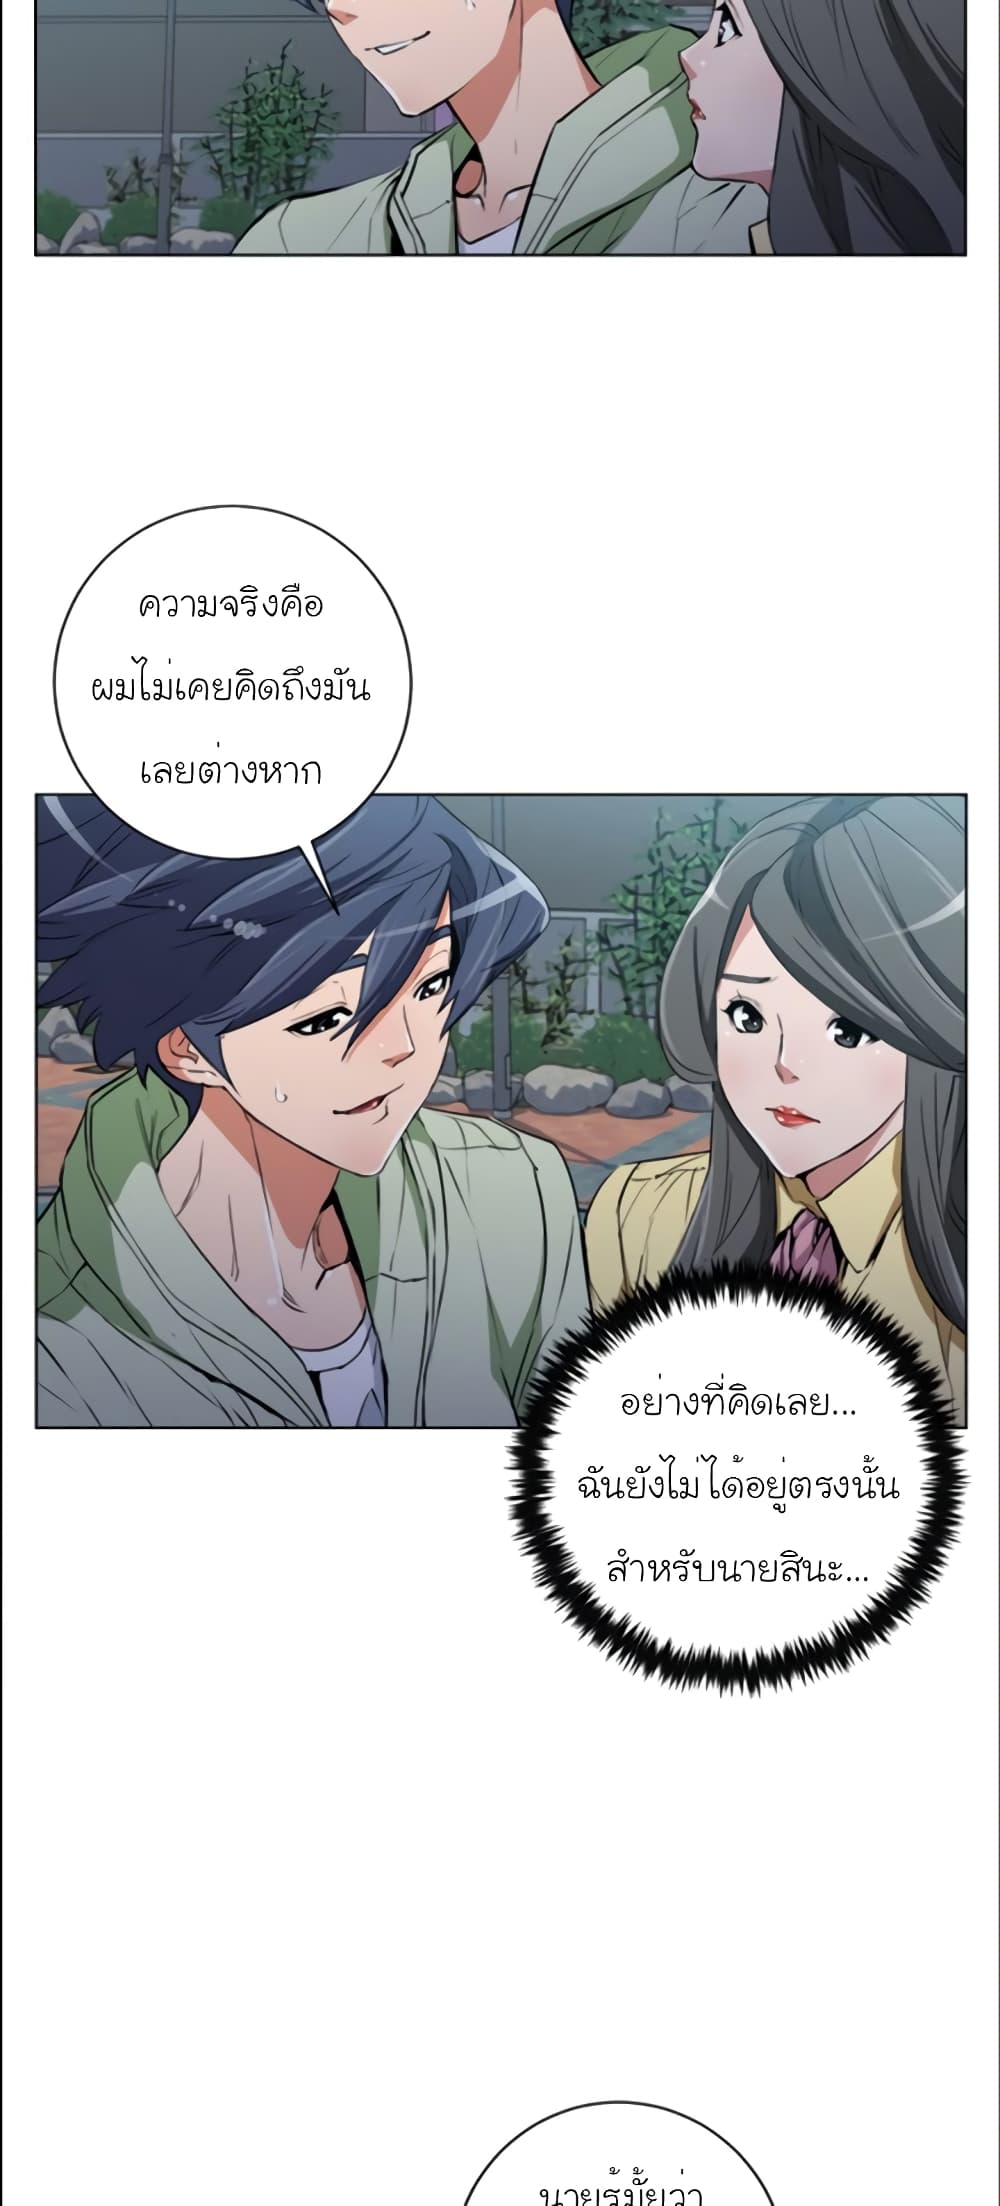 I Stack Experience Through Reading Books ตอนที่ 37 (3)